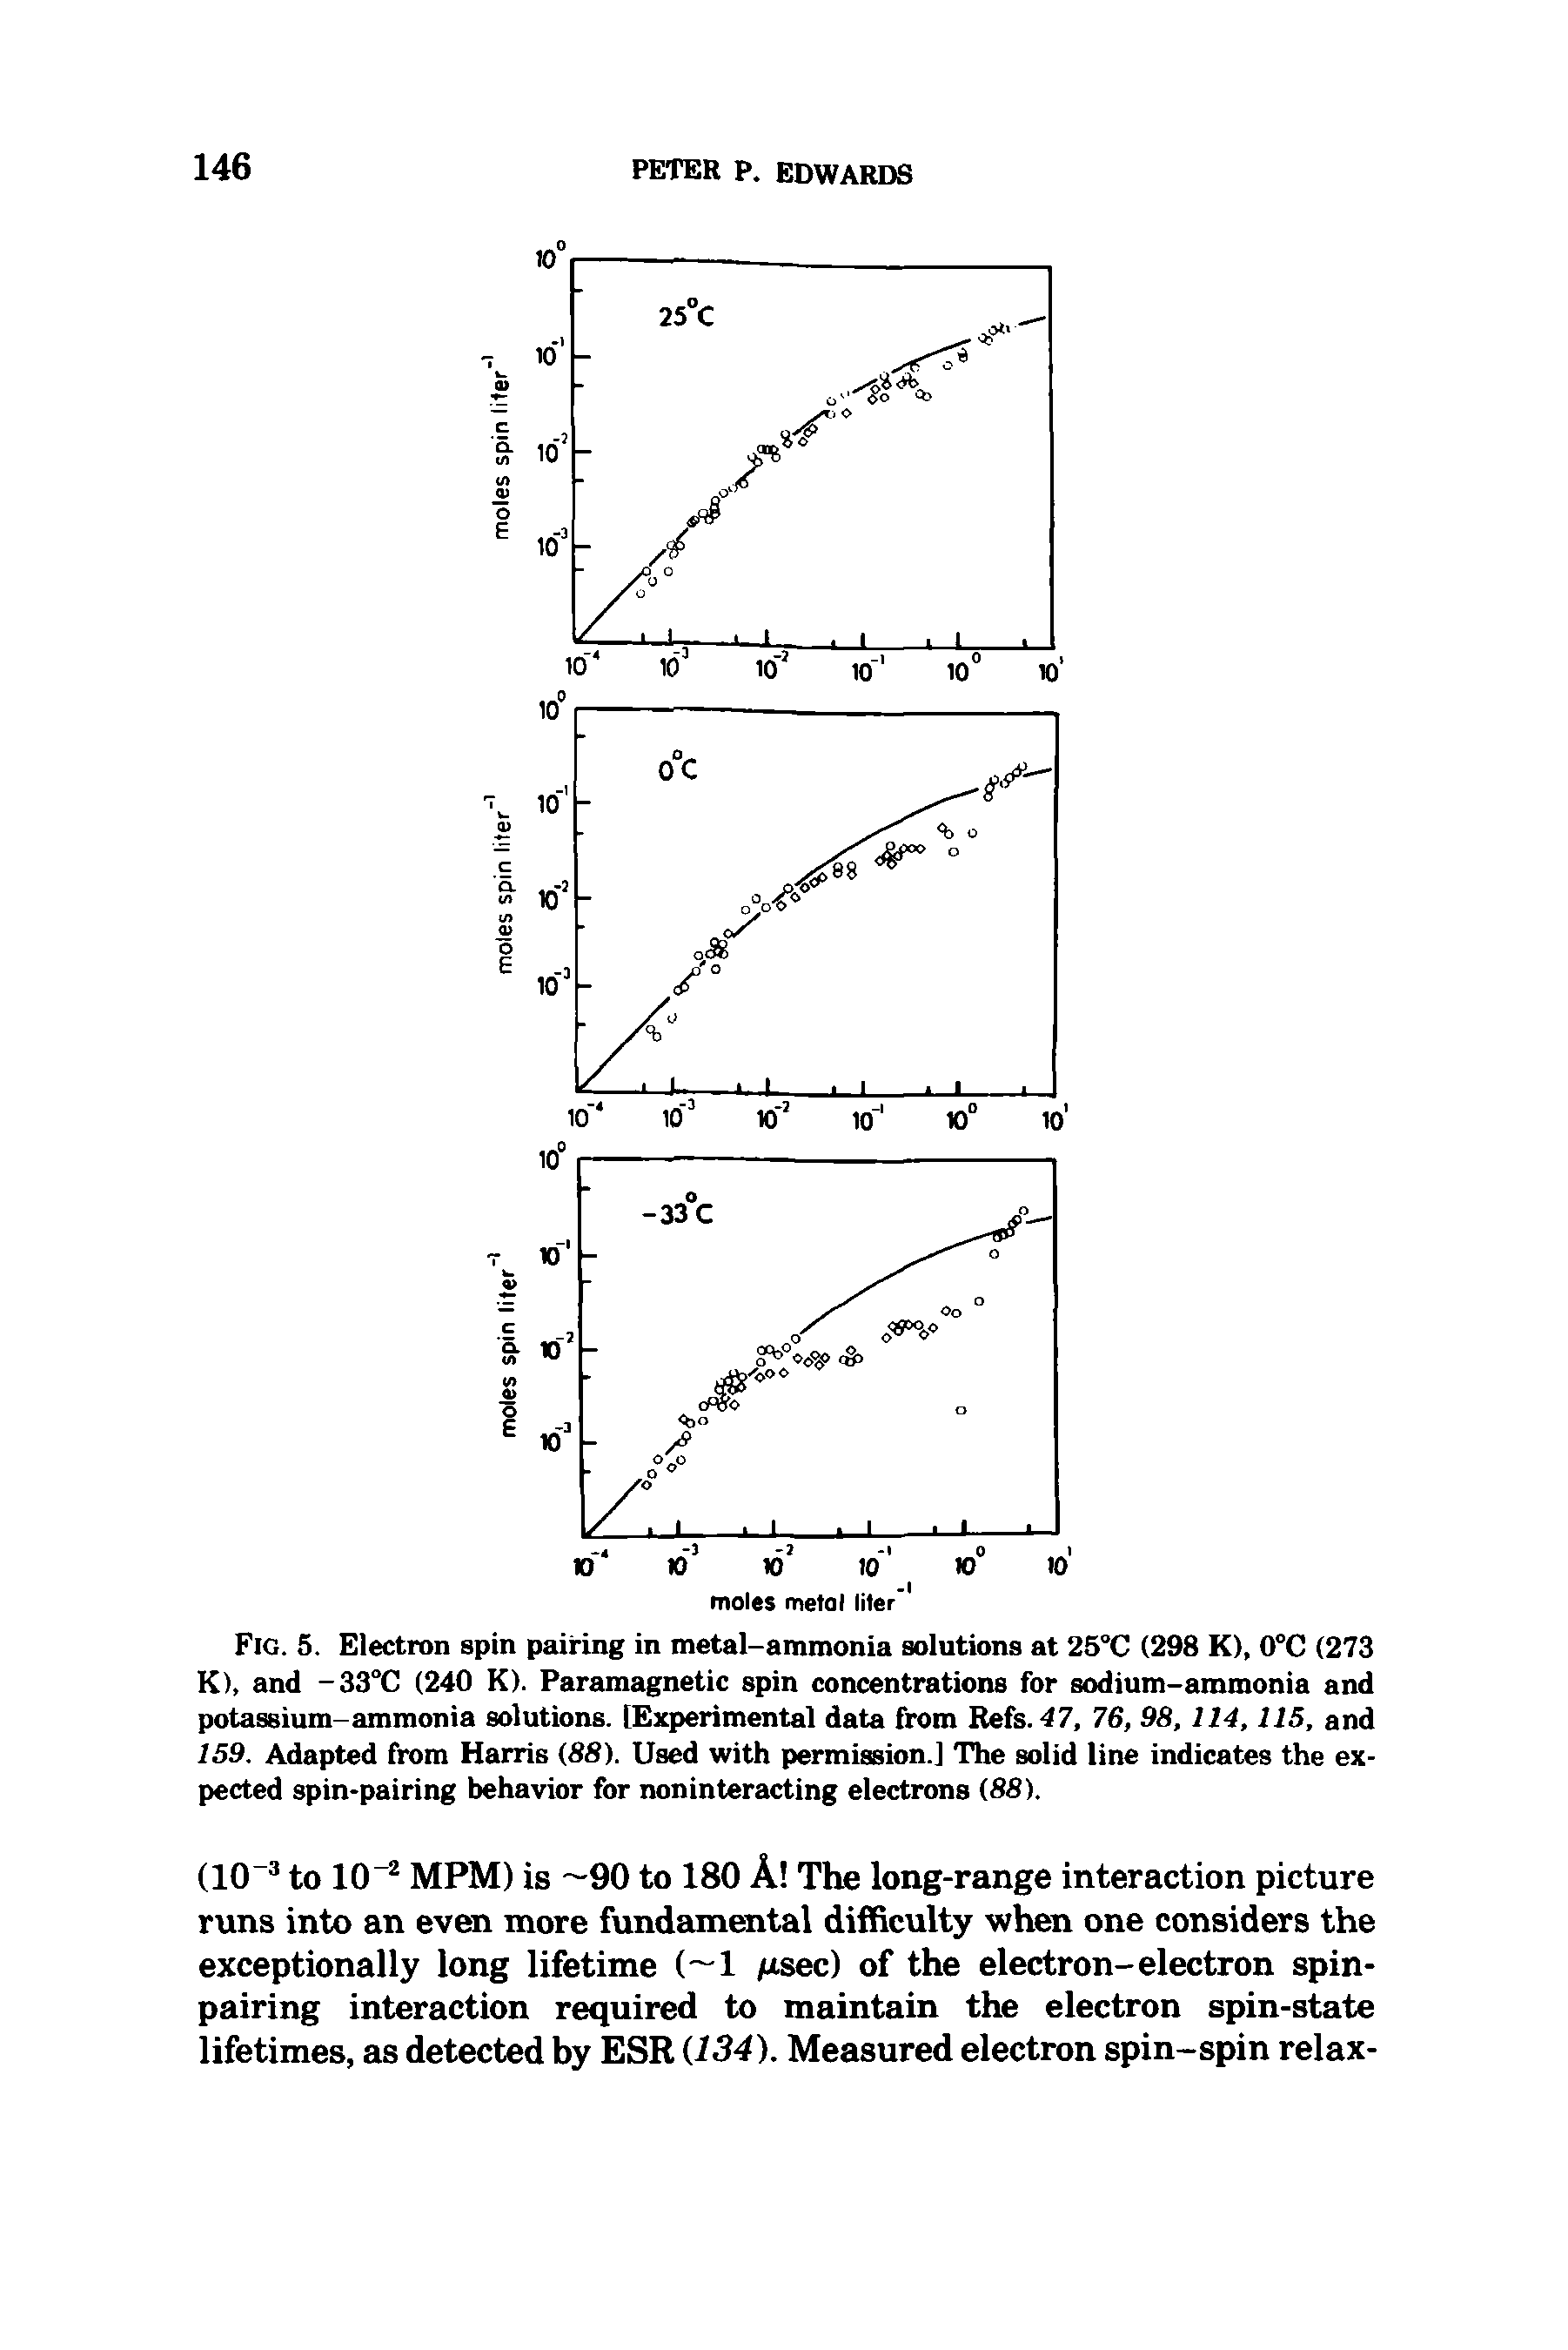 Fig. 5. Electron spin pairing in metal-ammonia solutions at 25°C (298 K), 0°C (273 K), and -33°C (240 K). Paramagnetic spin concentrations for sodium-ammonia and potassium-ammonia solutions. [Experimental data from Refs. 47, 76, 98, 114,115, and 159. Adapted from Harris (88). Used with permission.] The solid line indicates the expected spin-pairing behavior for noninteracting electrons (88).